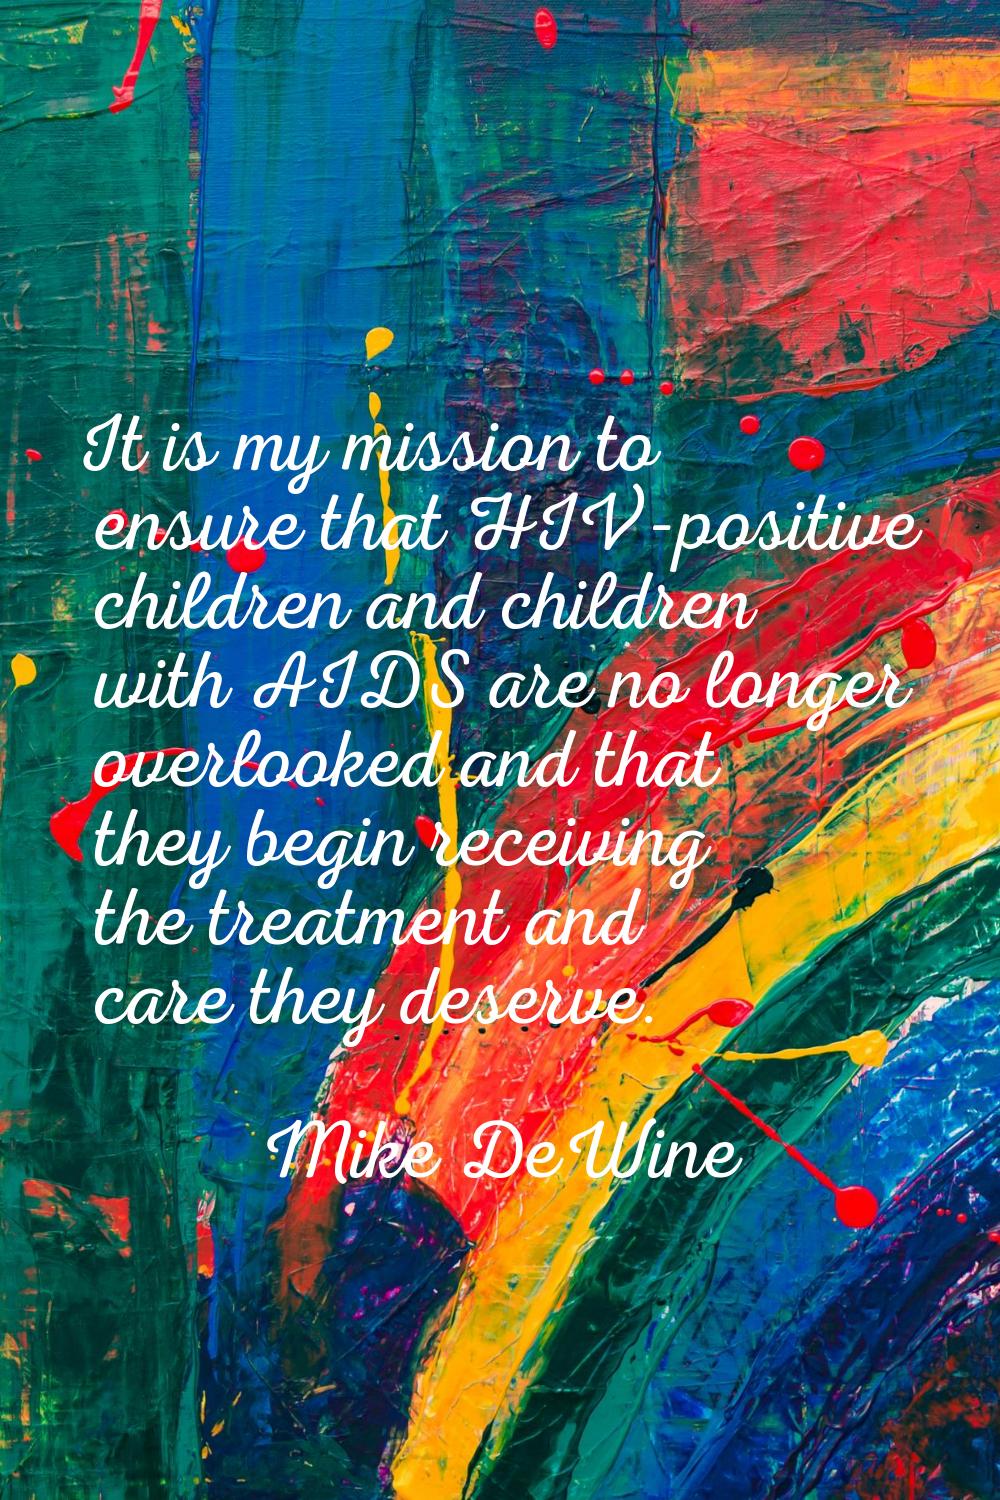 It is my mission to ensure that HIV-positive children and children with AIDS are no longer overlook